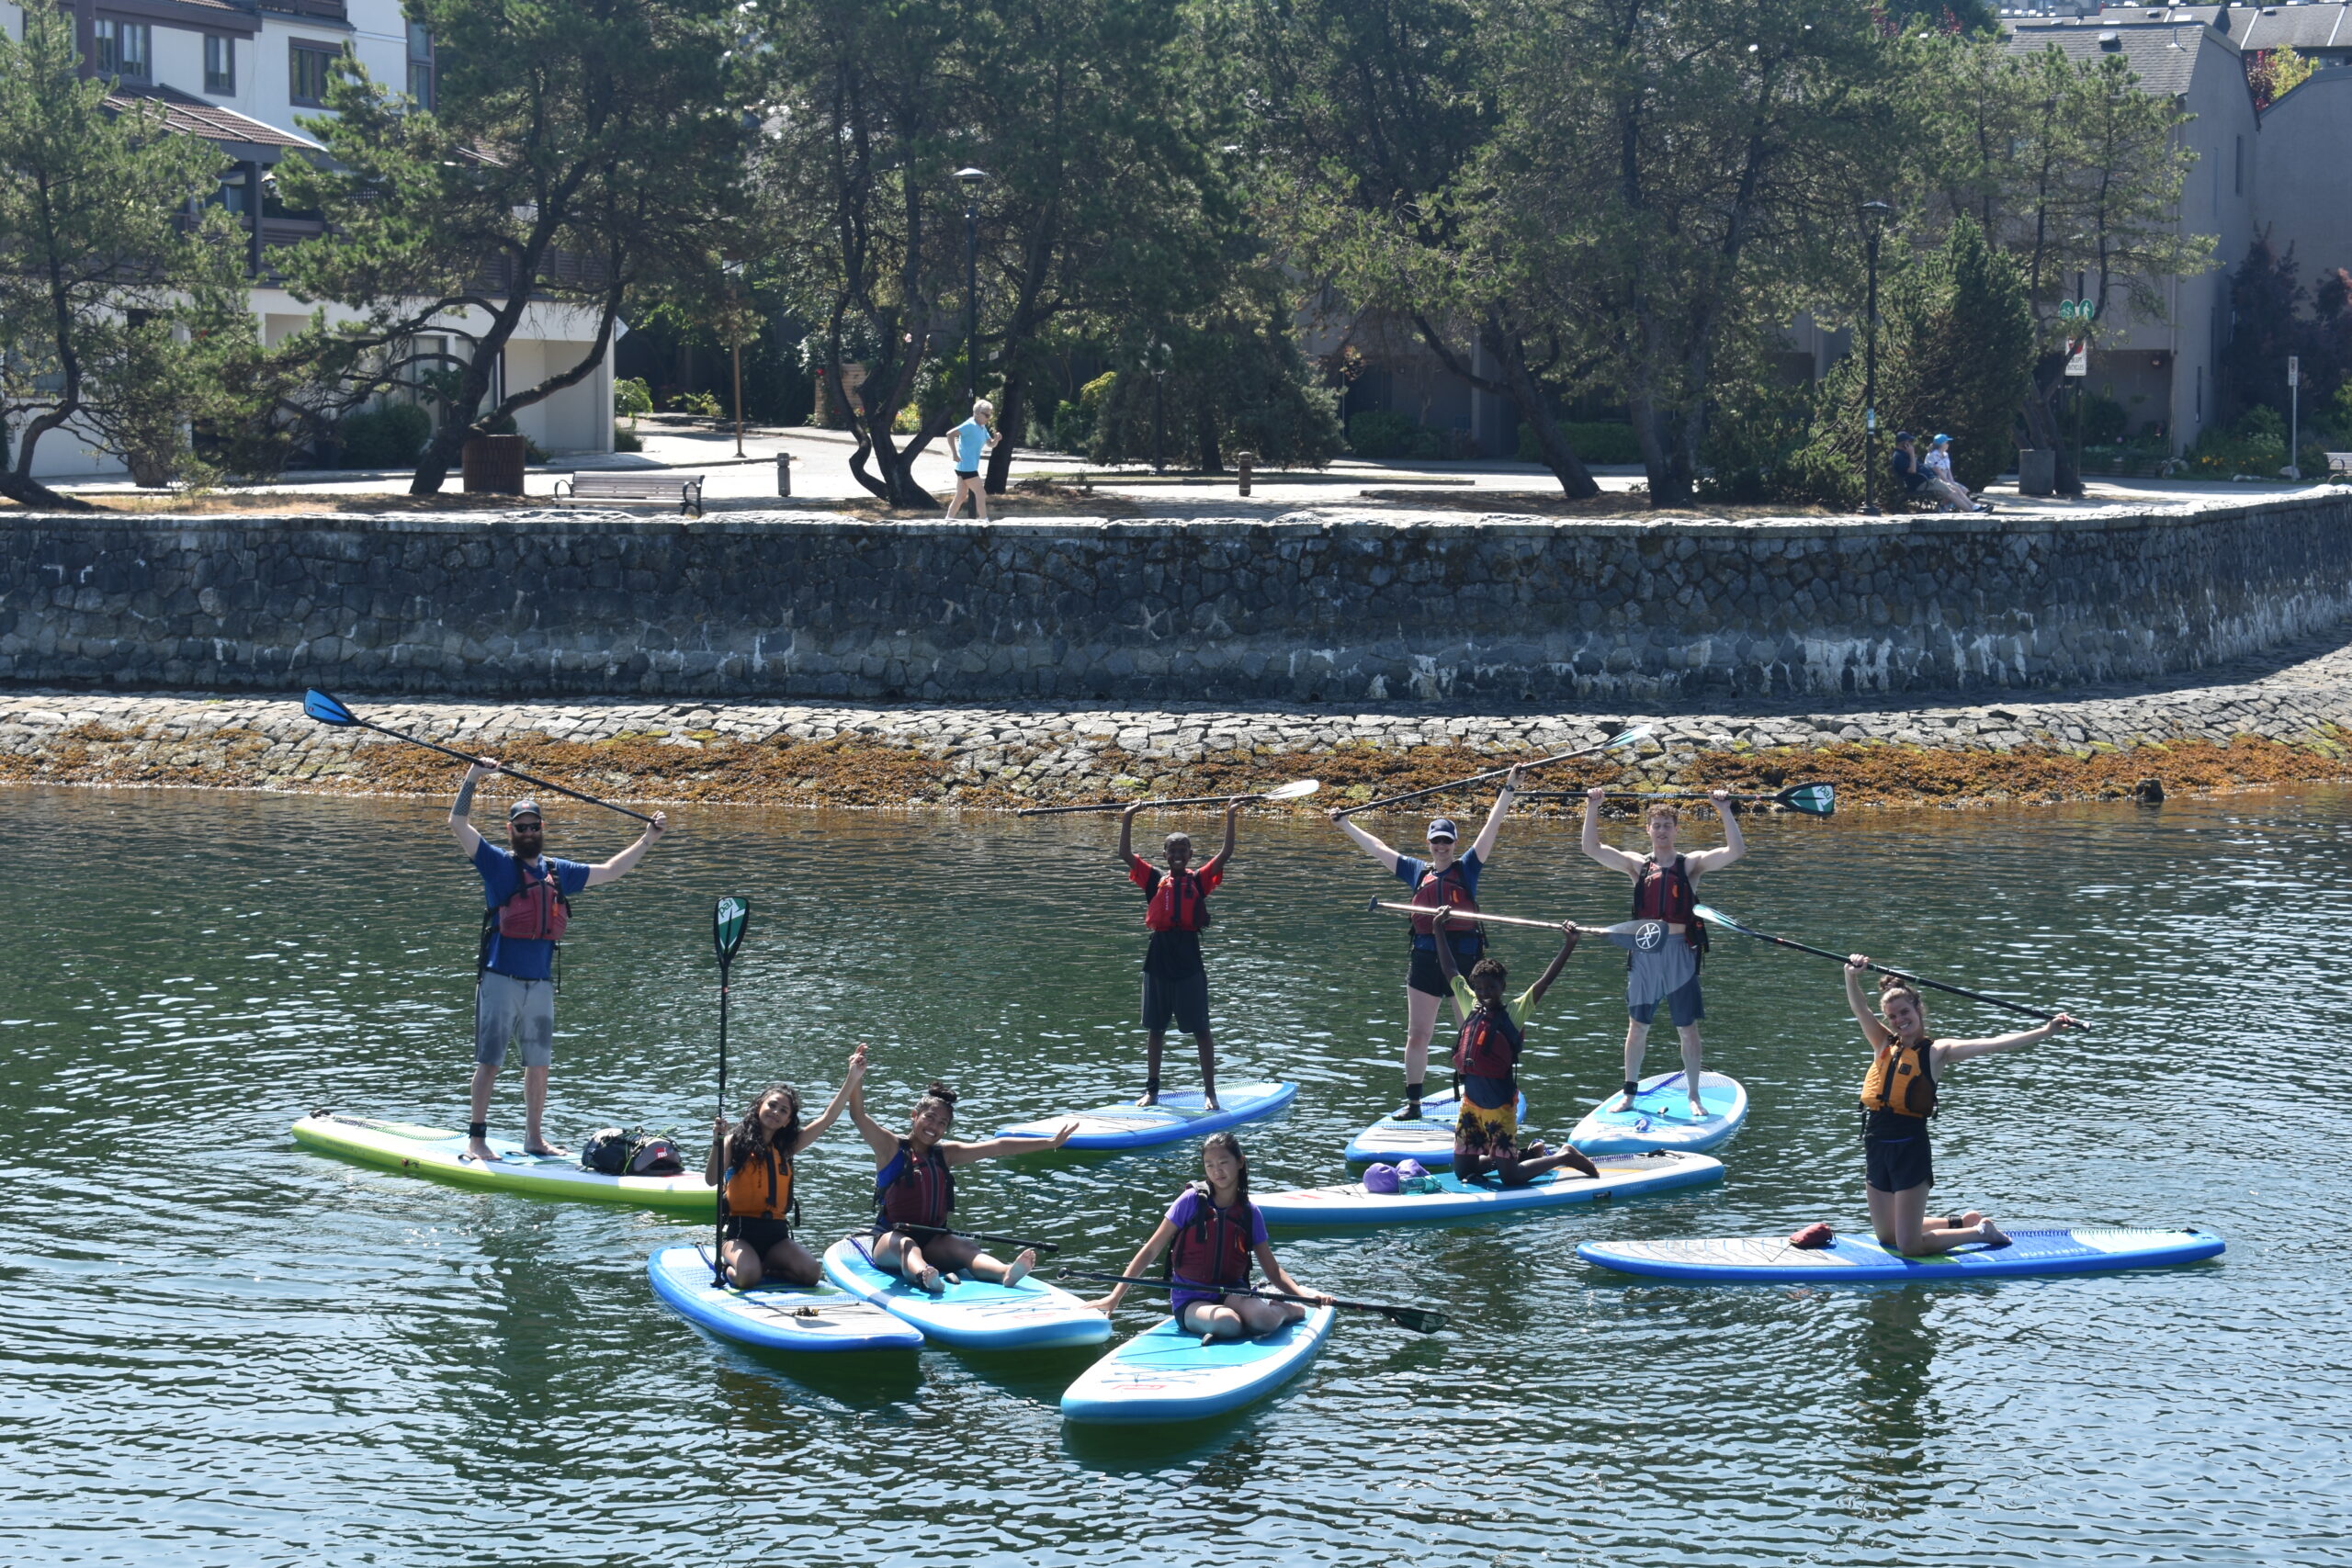 A whole group of Chill youth and adults on sup boards, posing for the photo with their paddles held in the air.